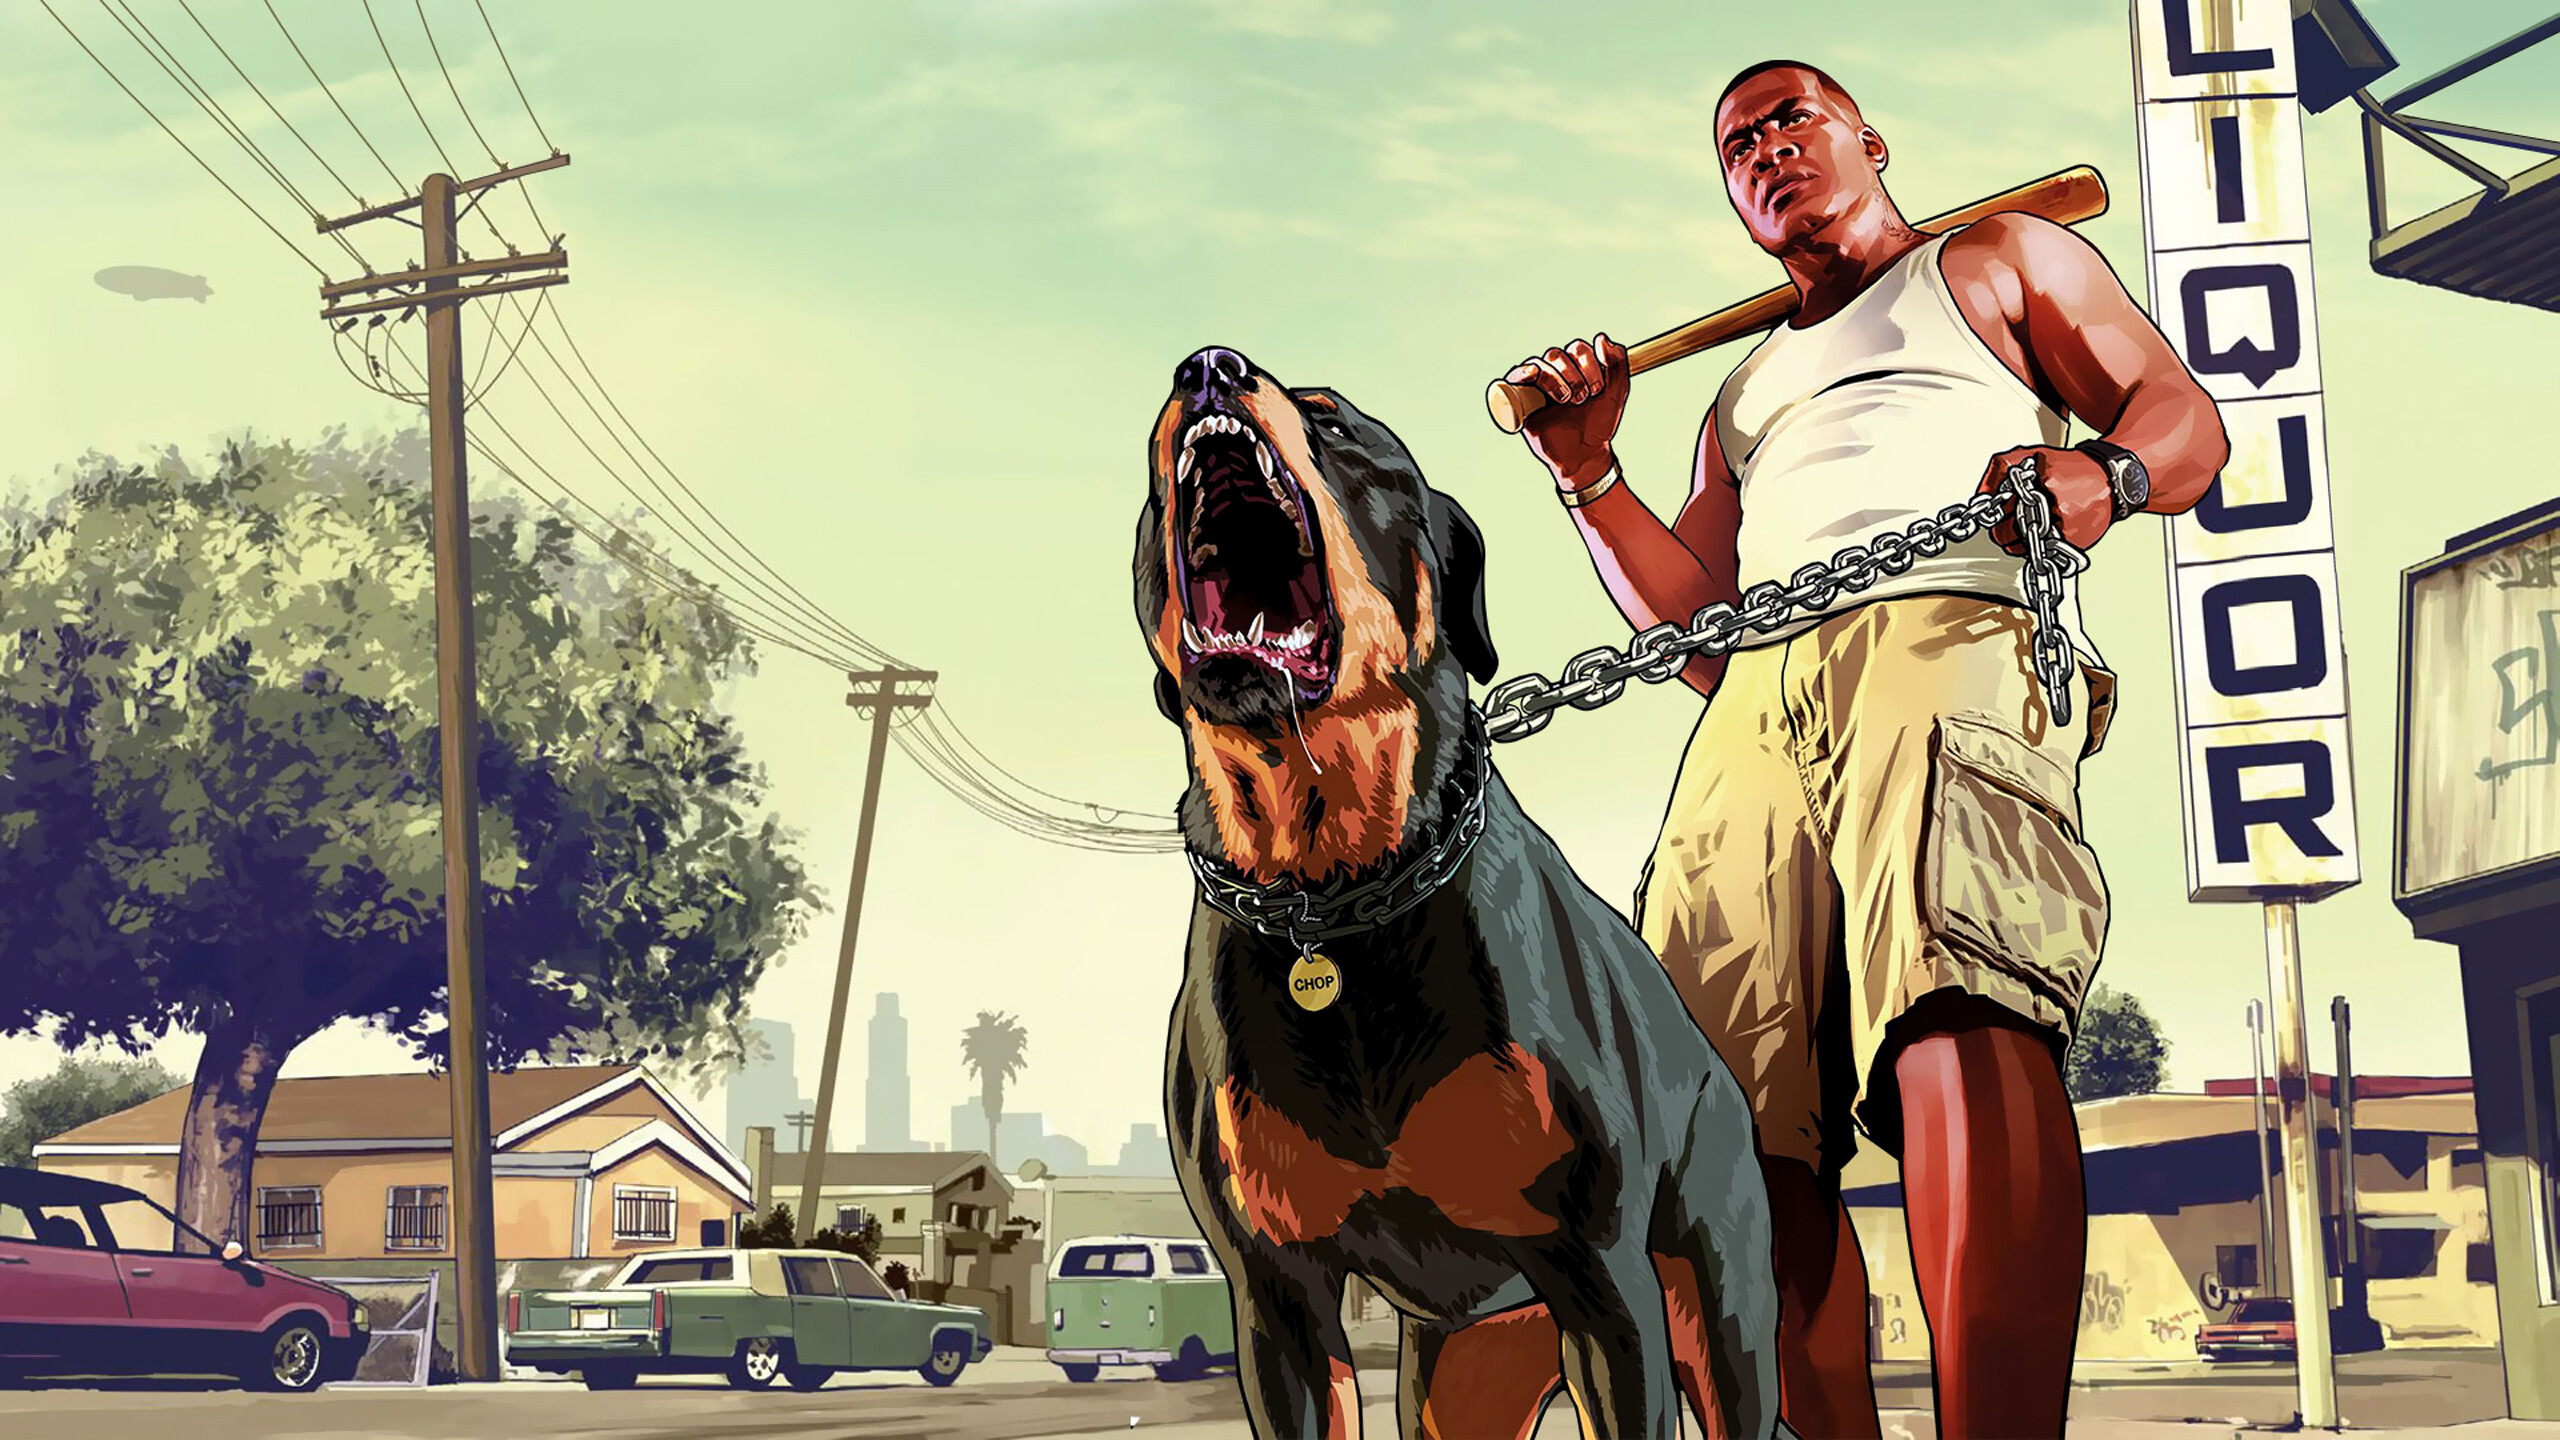 Grand Theft Auto 5: Franklin, Wants to rise above the lowly ranks of street hustles, Chop. 2560x1440 HD Wallpaper.